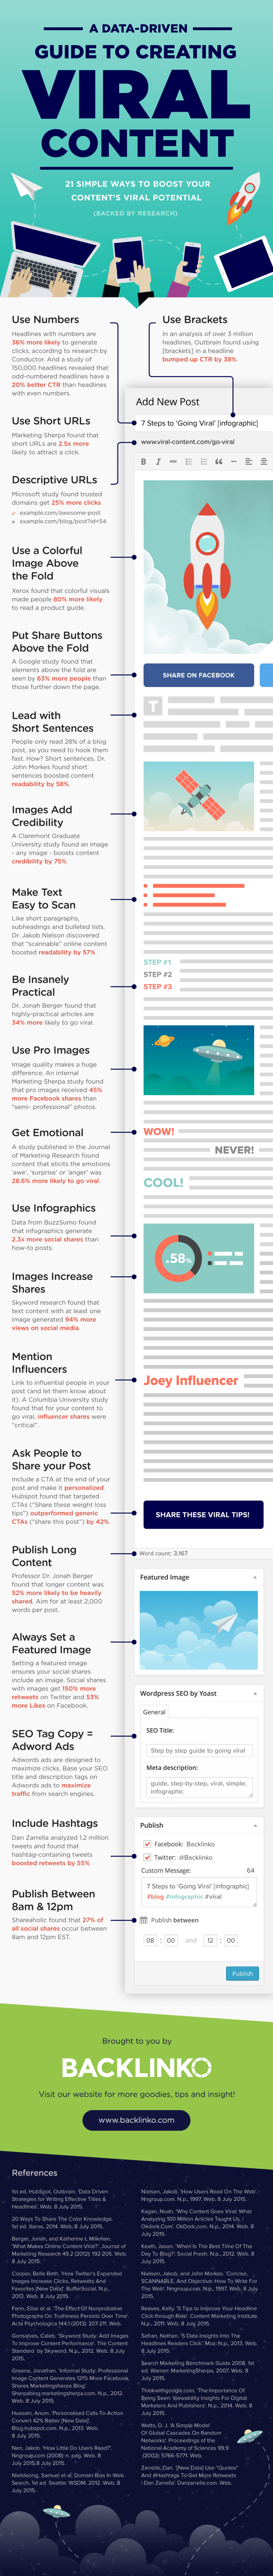 Viral content infographic